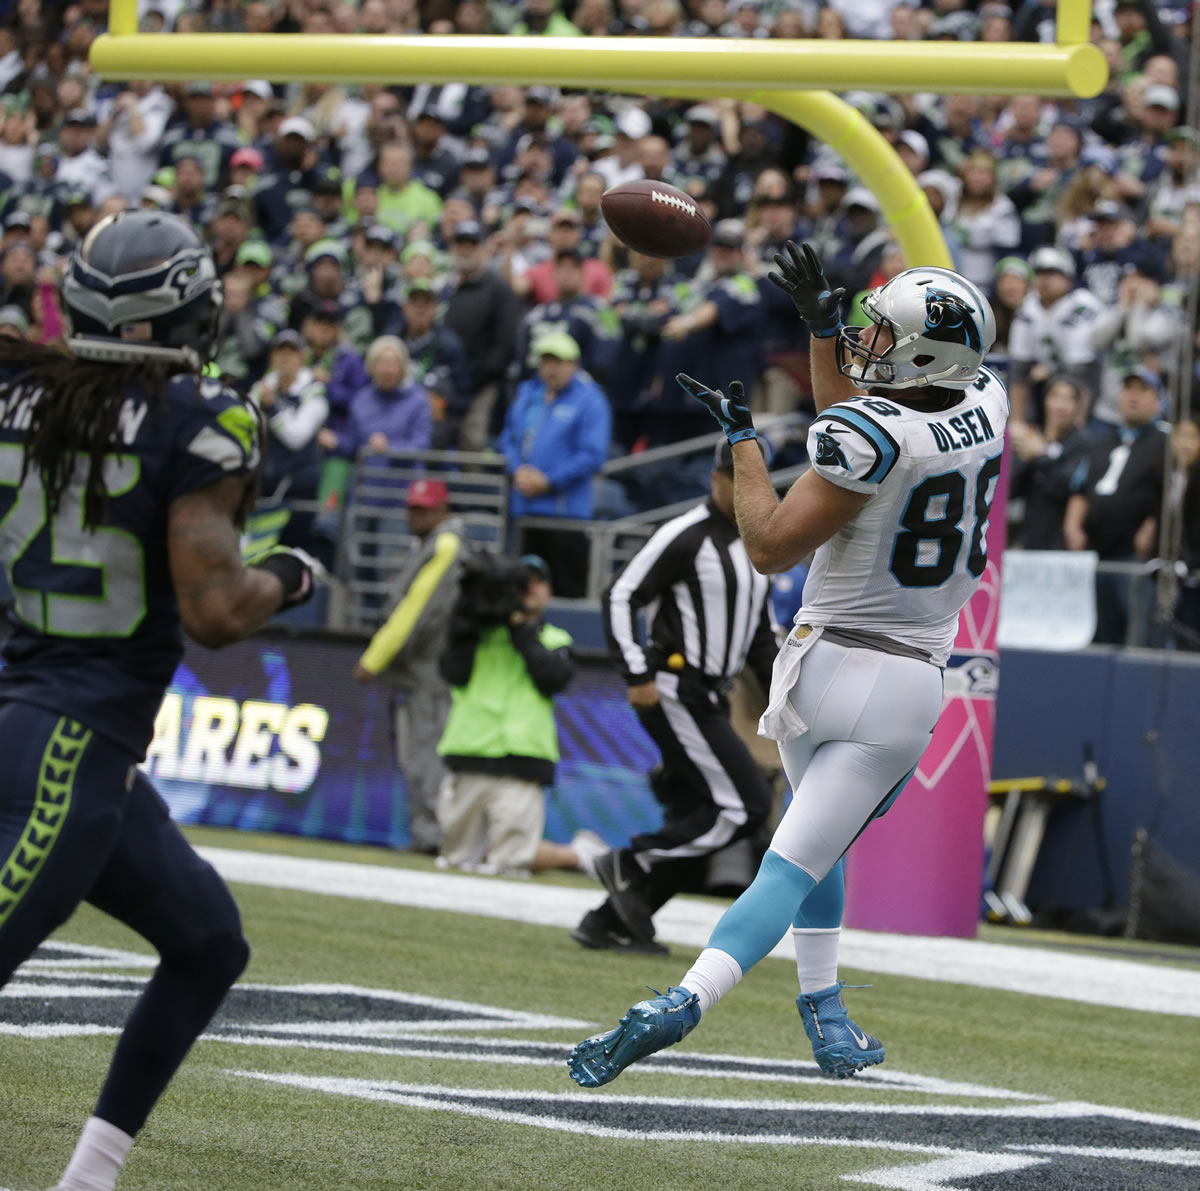 Geno Smith's late-game heroics lead Seahawks to stunning victory